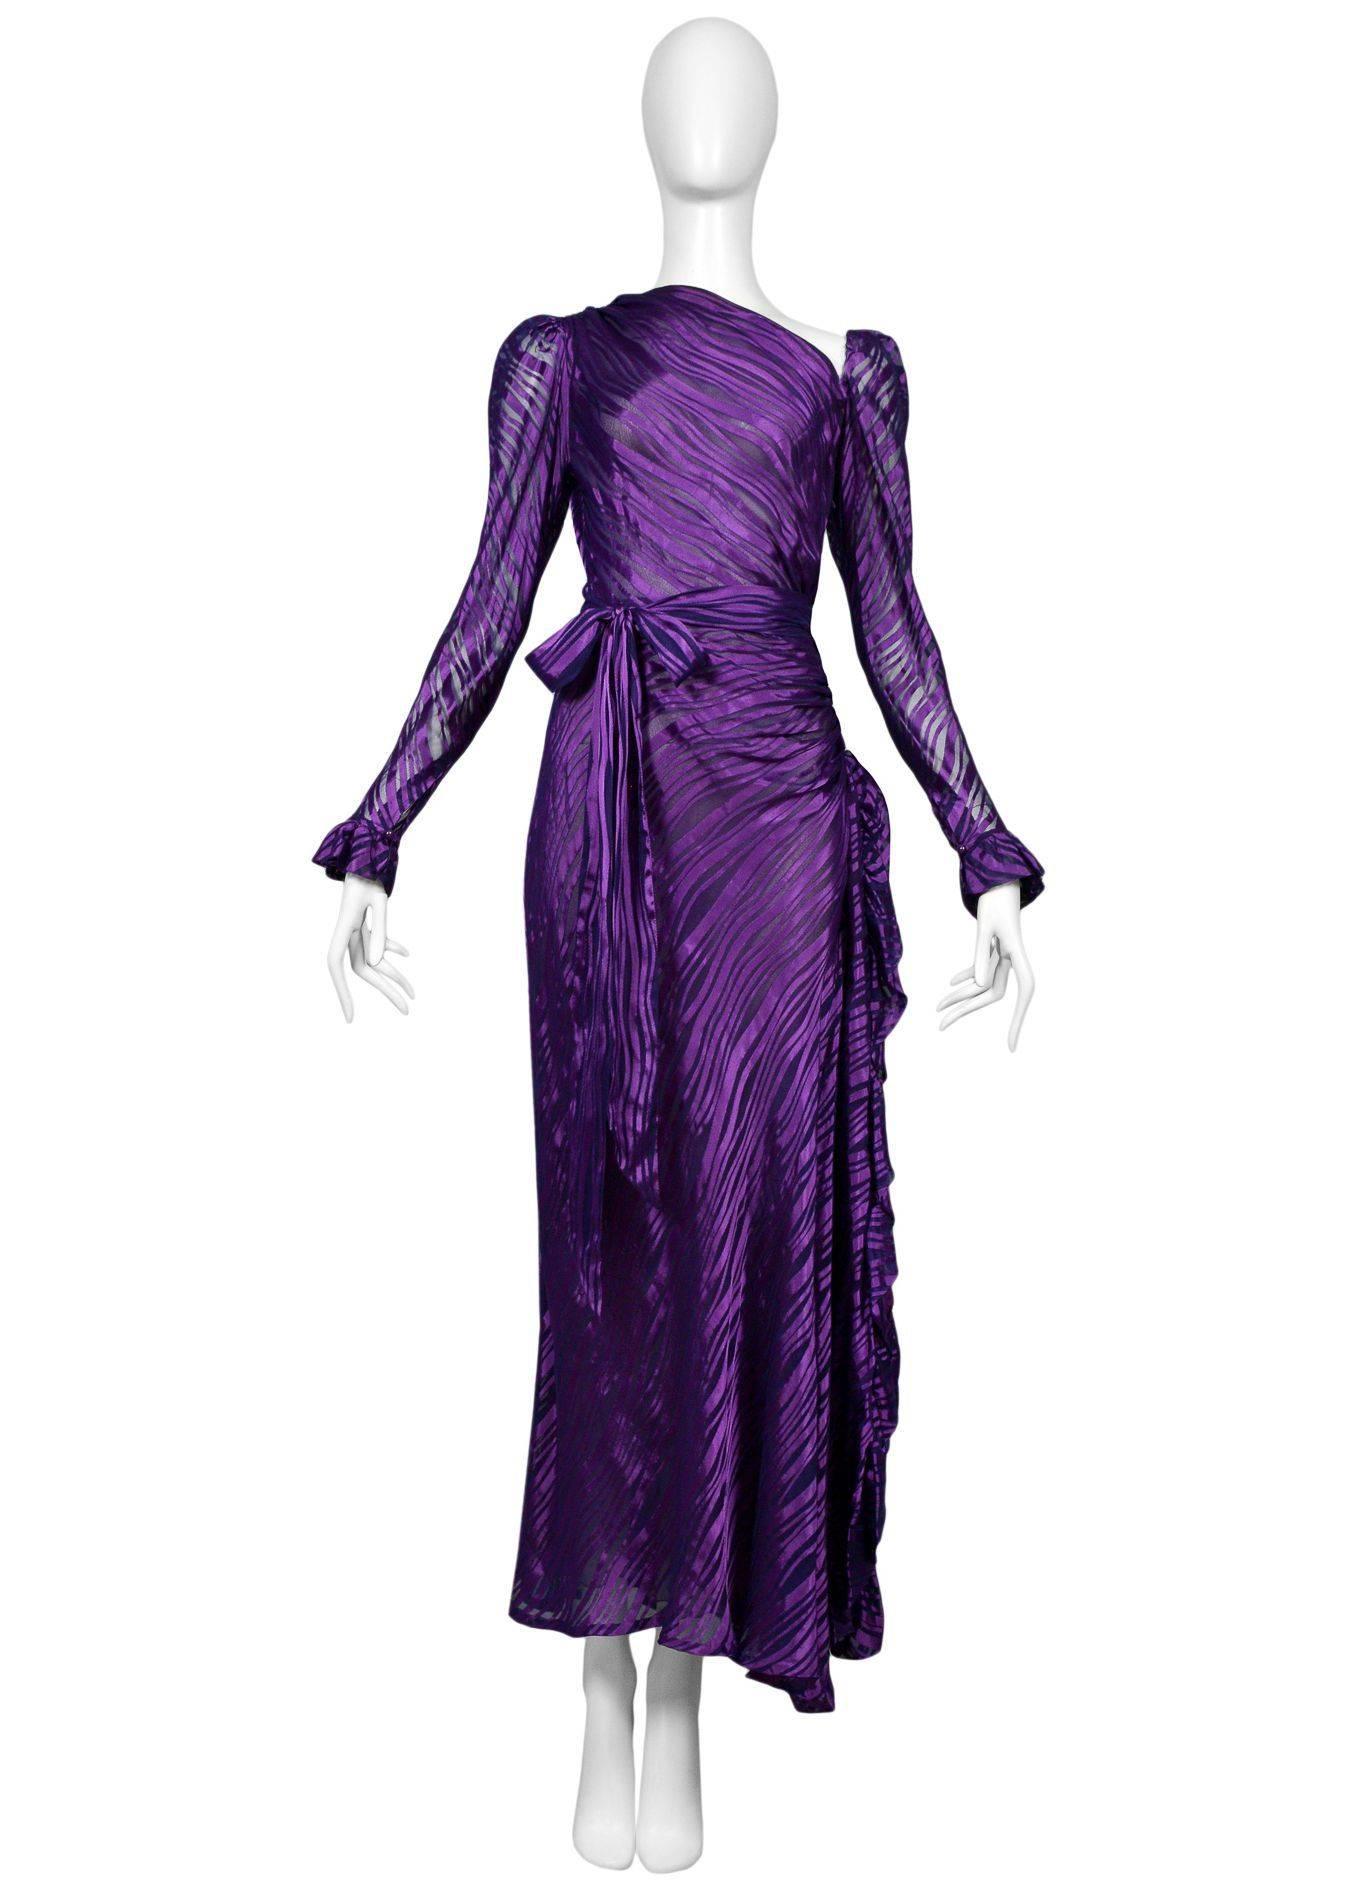 Vintage Yves Saint Laurent royal purple sheer satin gown. Featuring a ruffled high waist slit with matching waist sash. Collection 1980.